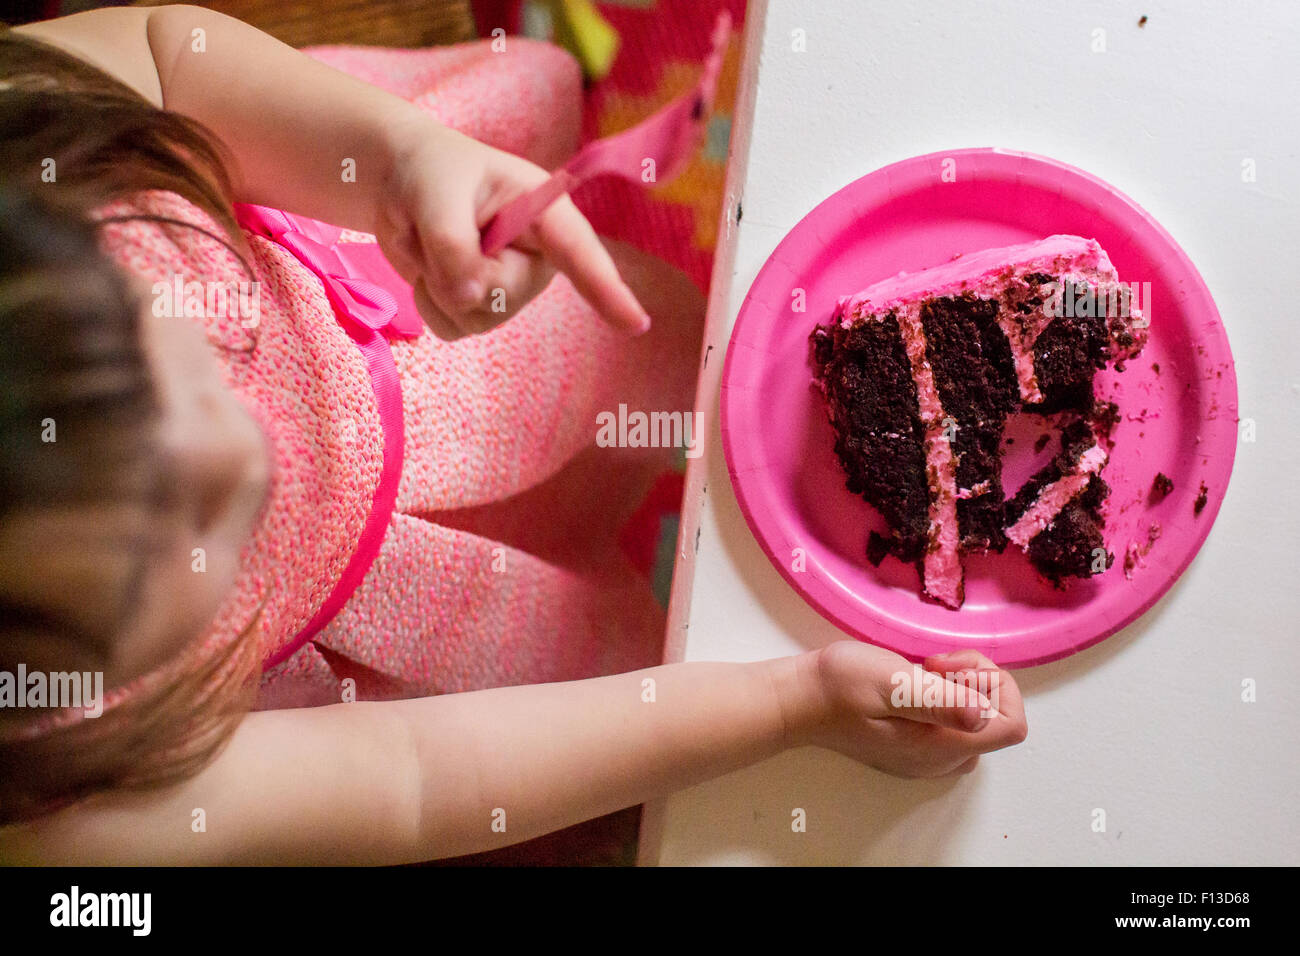 Overhead view of girl sitting at a table eating a slice of chocolatecake Stock Photo